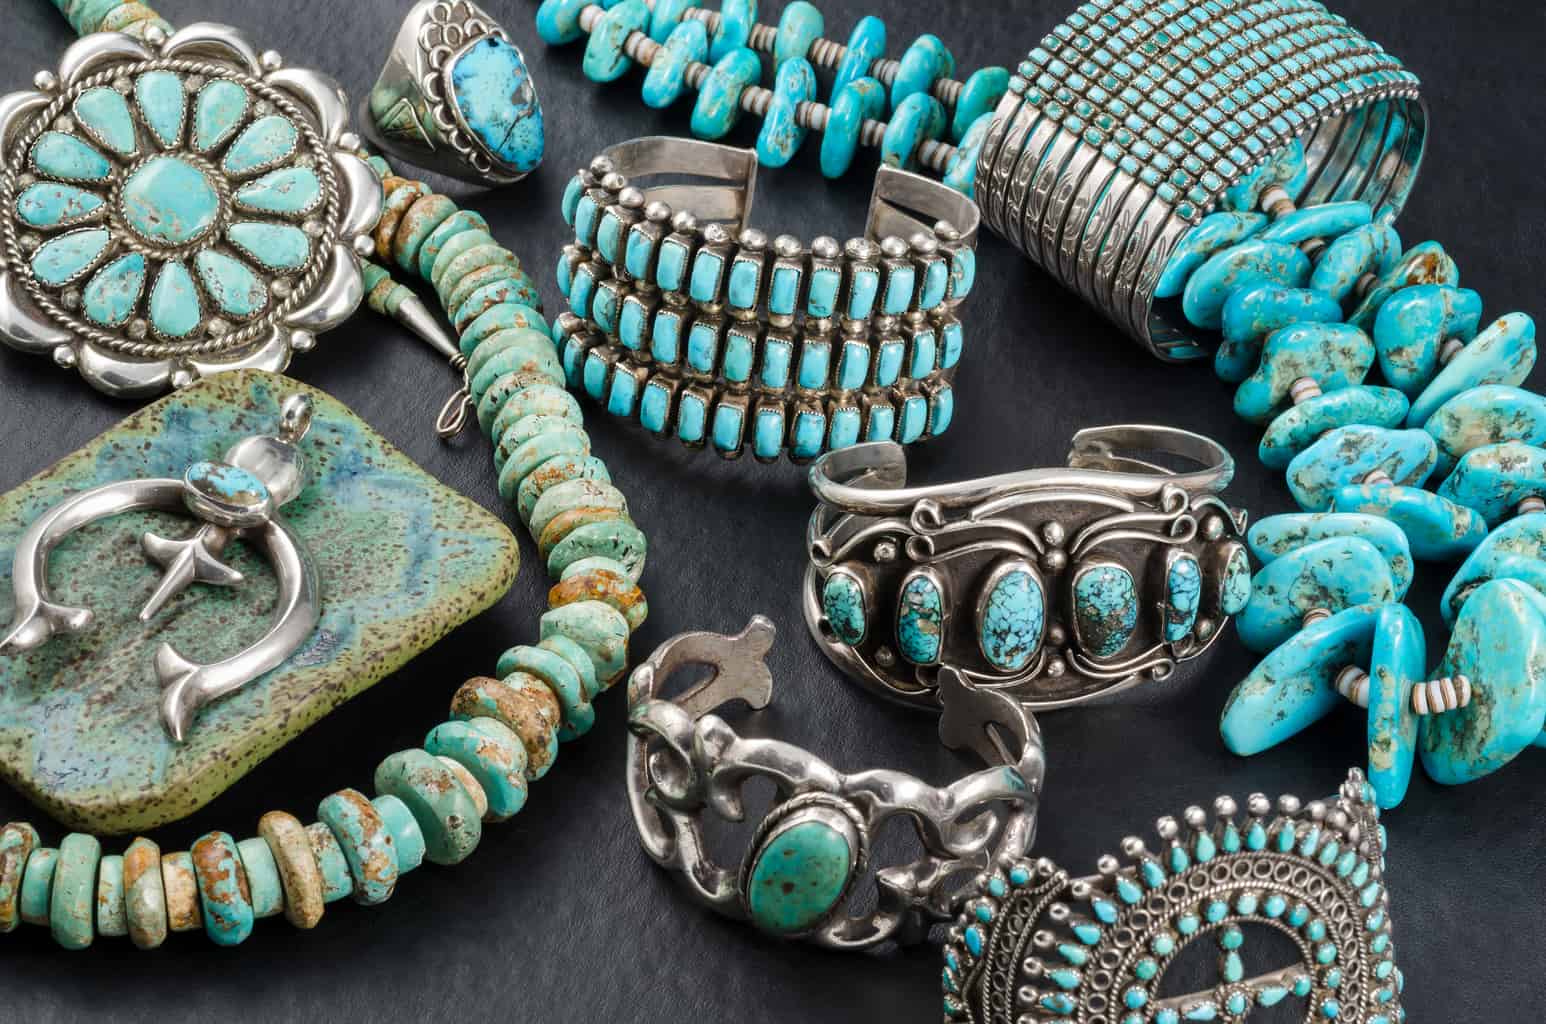 Native American Turquoise Jewelry Through History and Today - PowWows.com